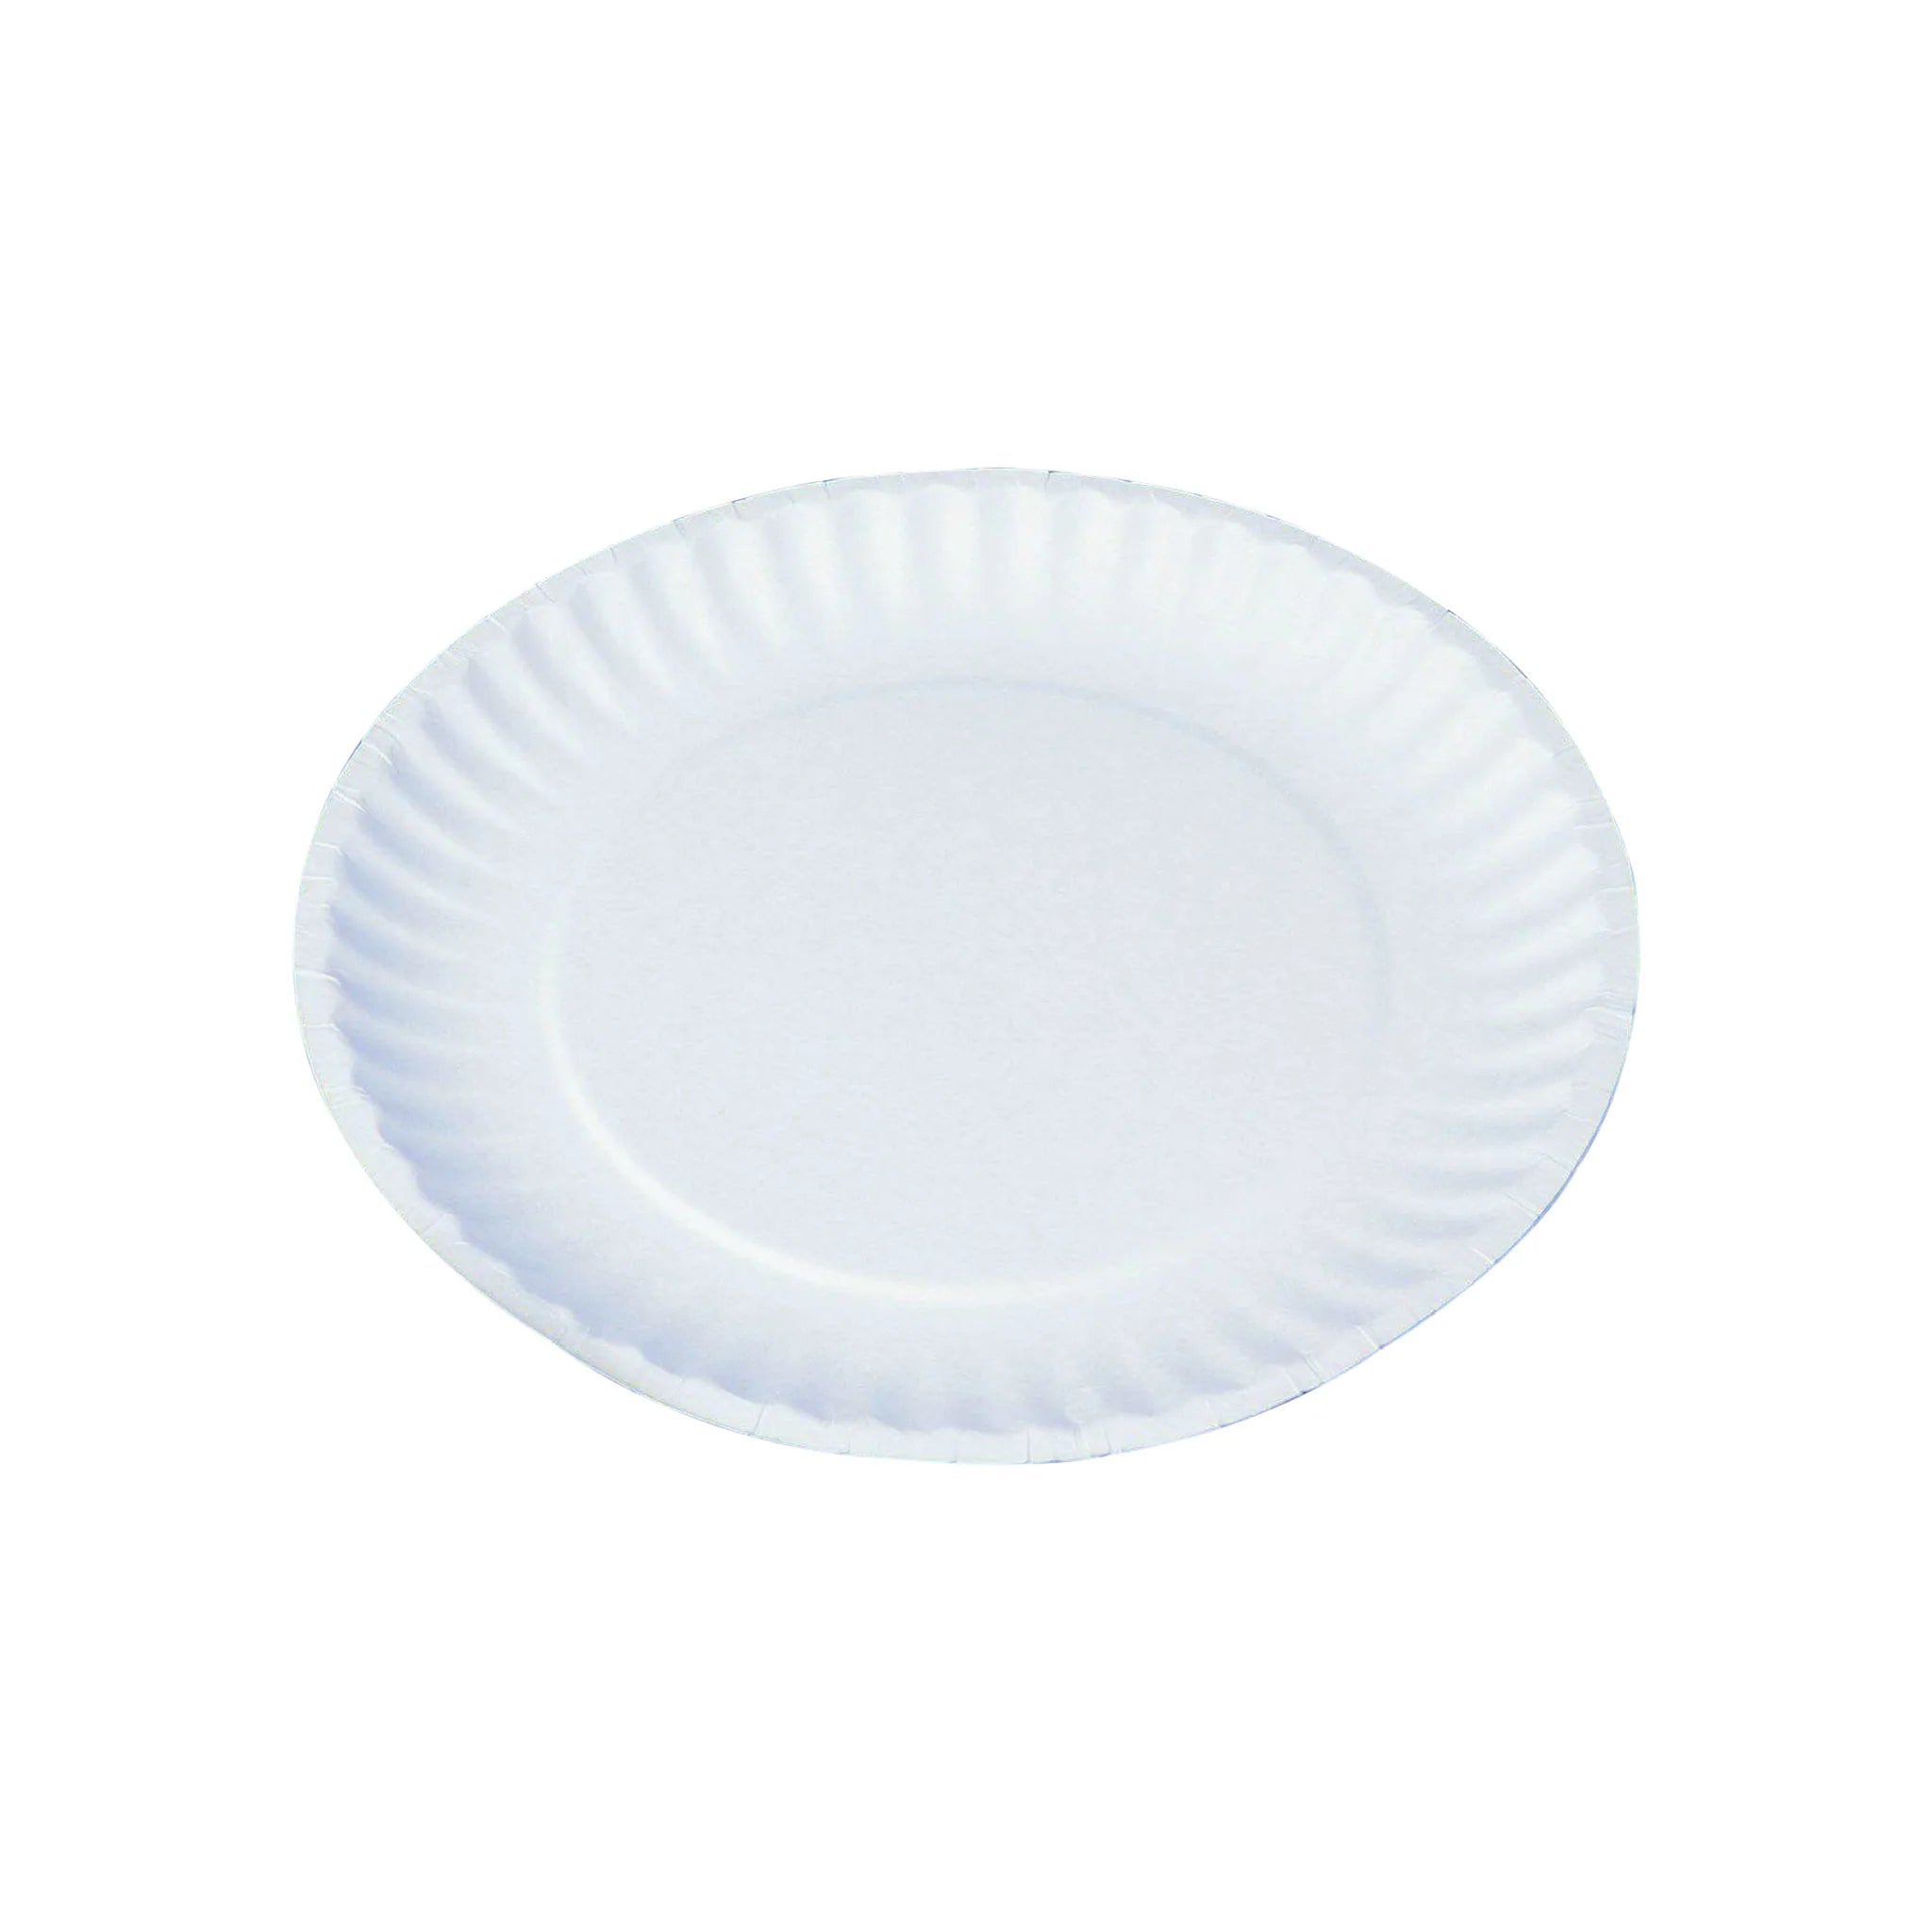 Hotpack | Paper Plate, 7 Inch, Light Duty | 100 Pieces x 12 Packets - Hotpack Bahrain